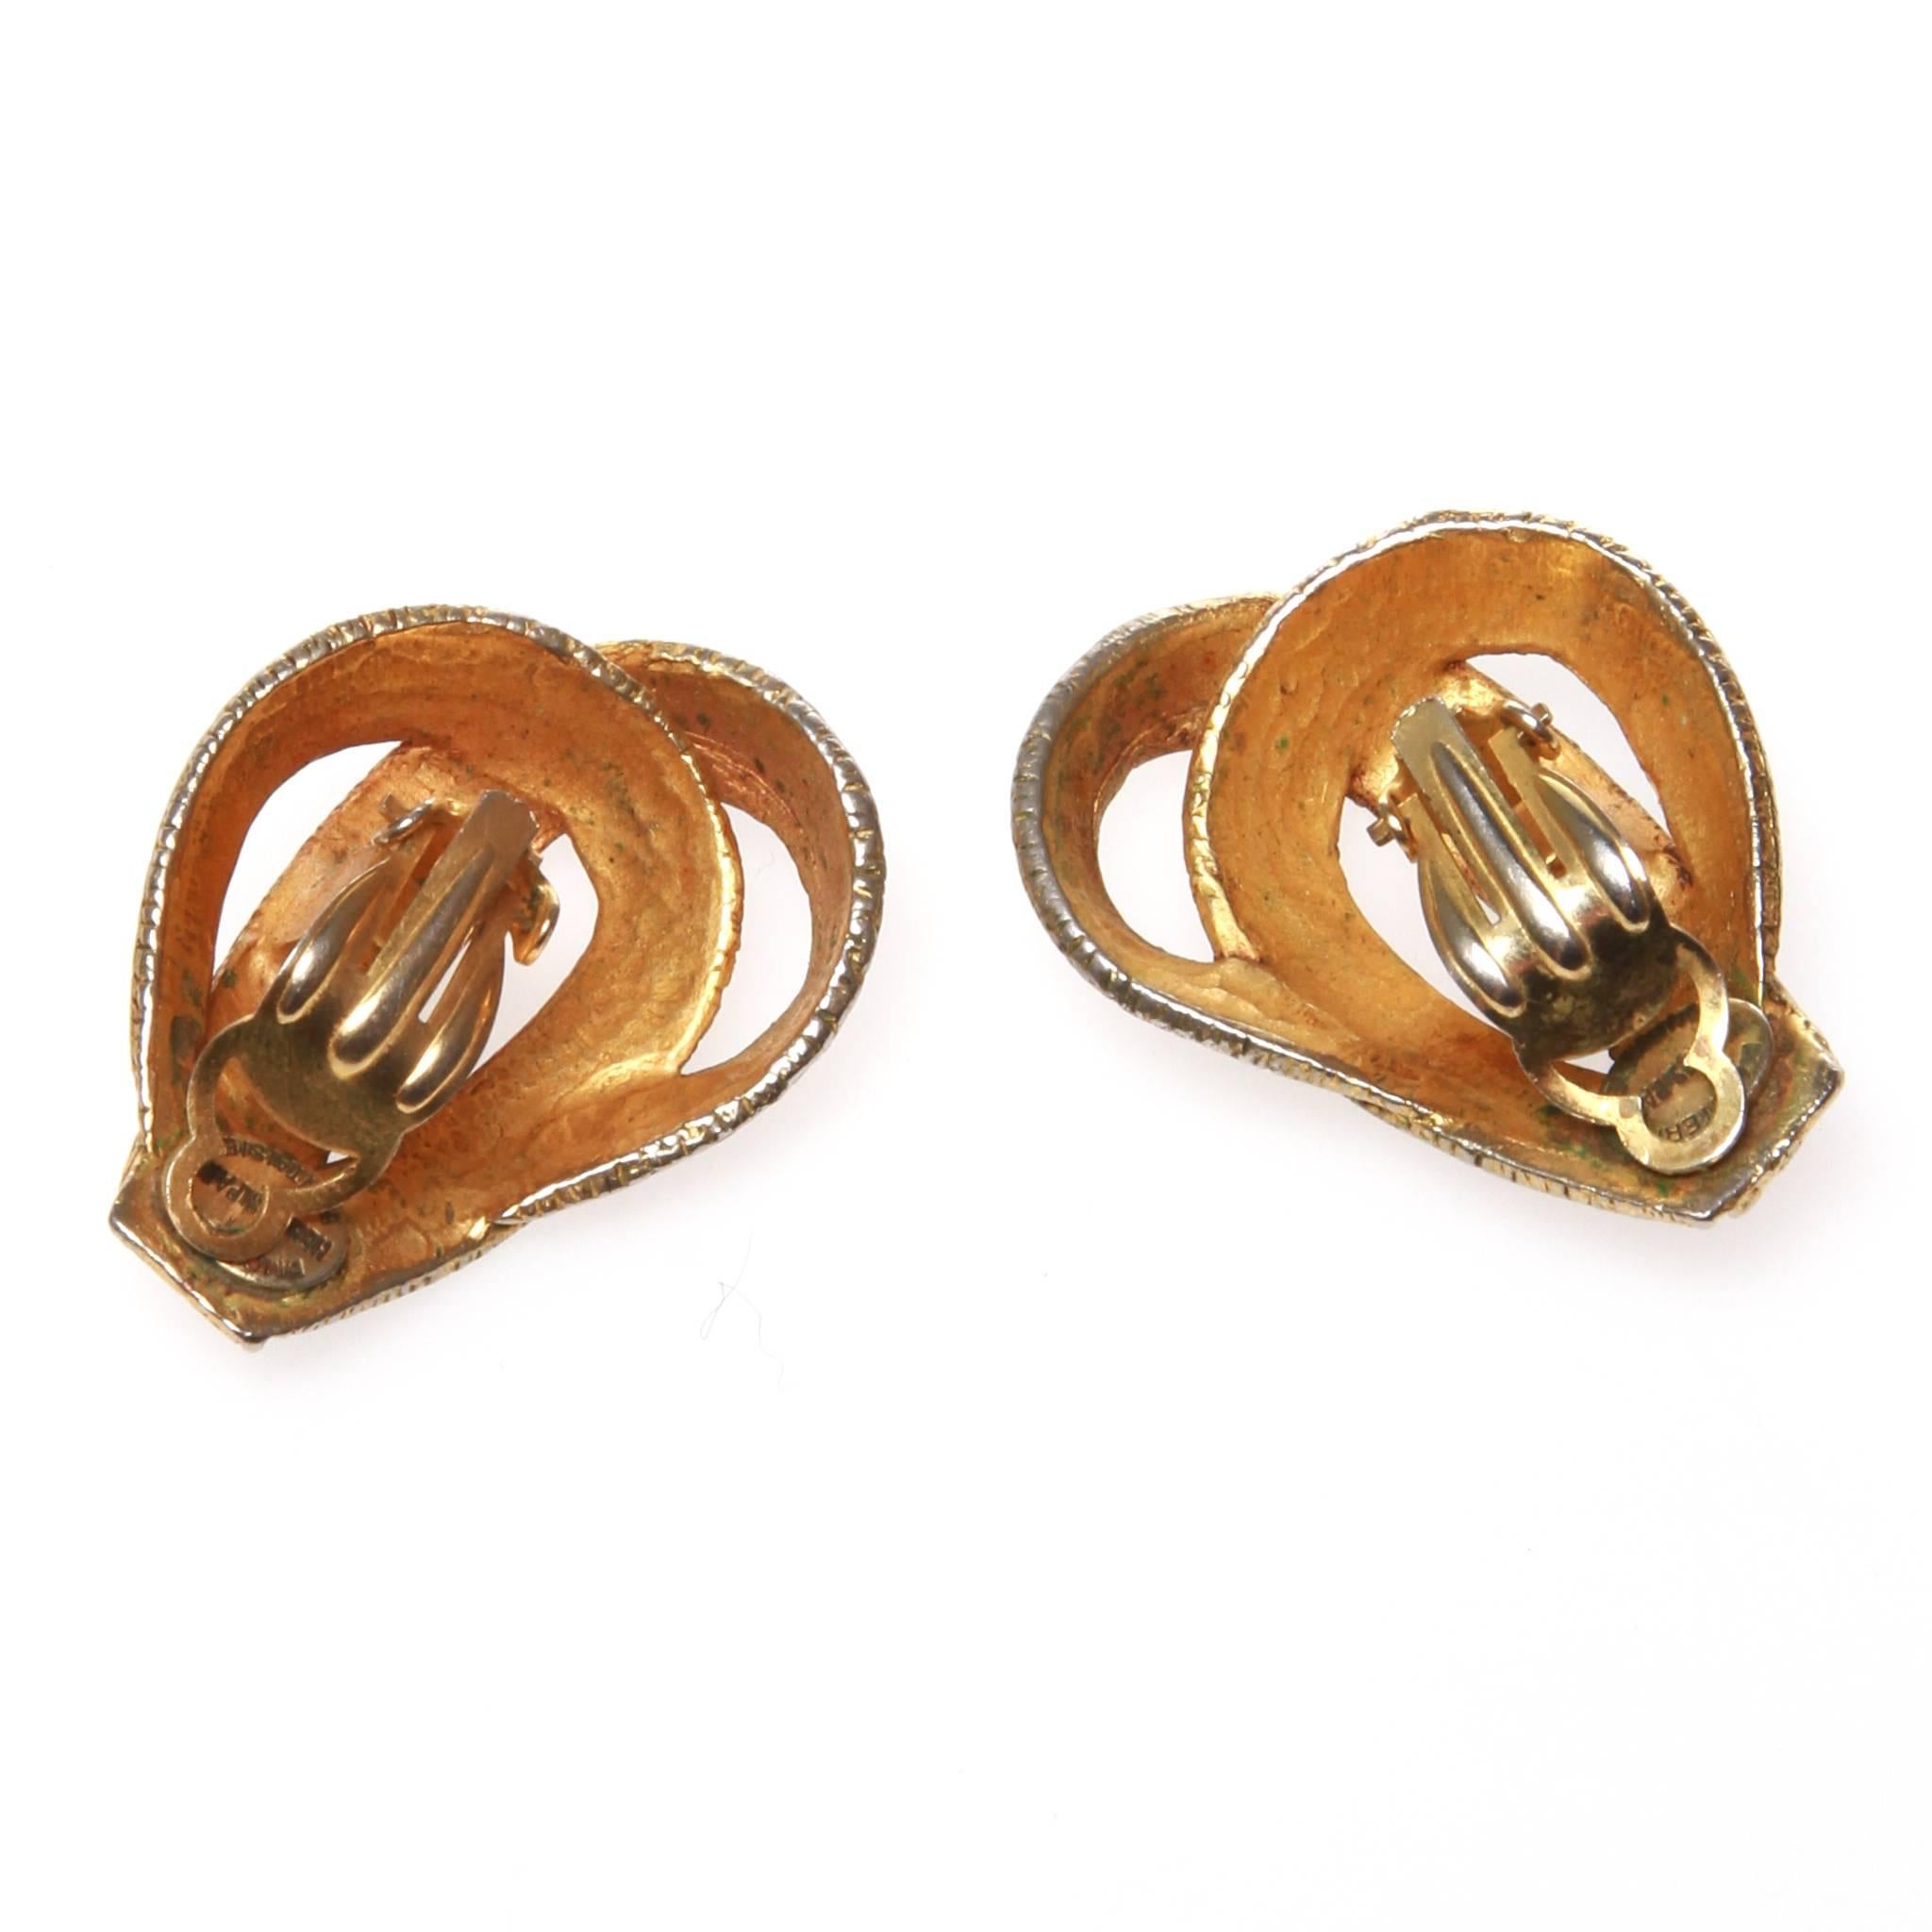 Hermes vintage 'Ruban' earrings featuring engraved gold-tone metal to look like the signature Hermes ribbon. 